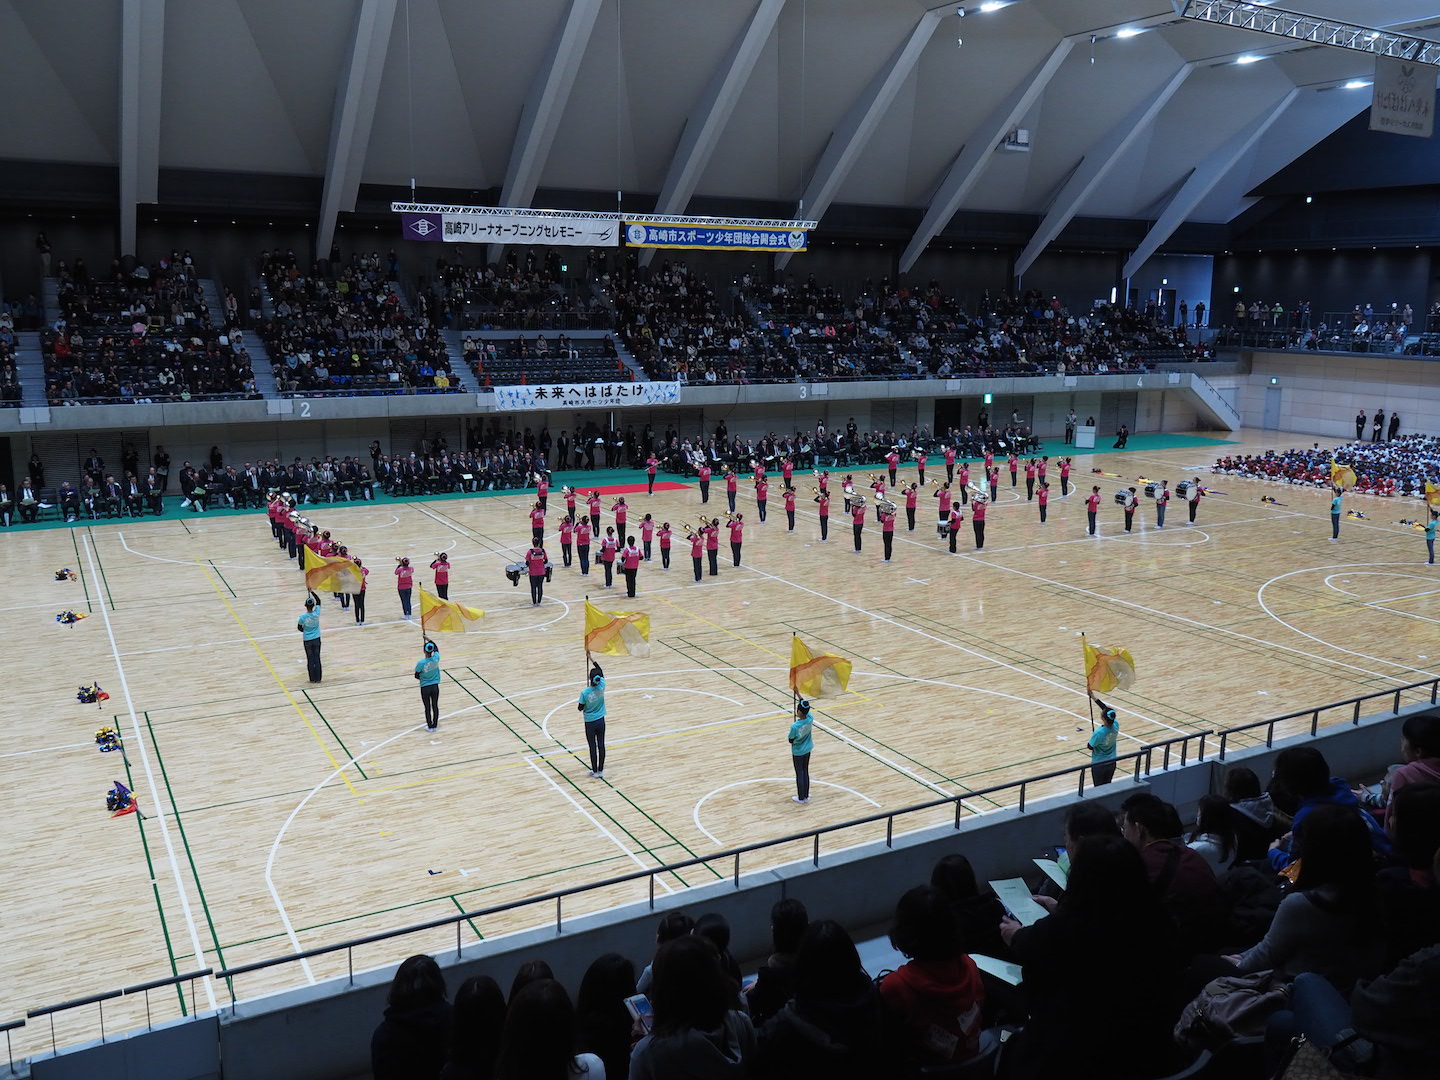 Takasaki Arena Opening Ceremony<br />Performed by<br />The Takasaki Technical Leaders Marching Band 2